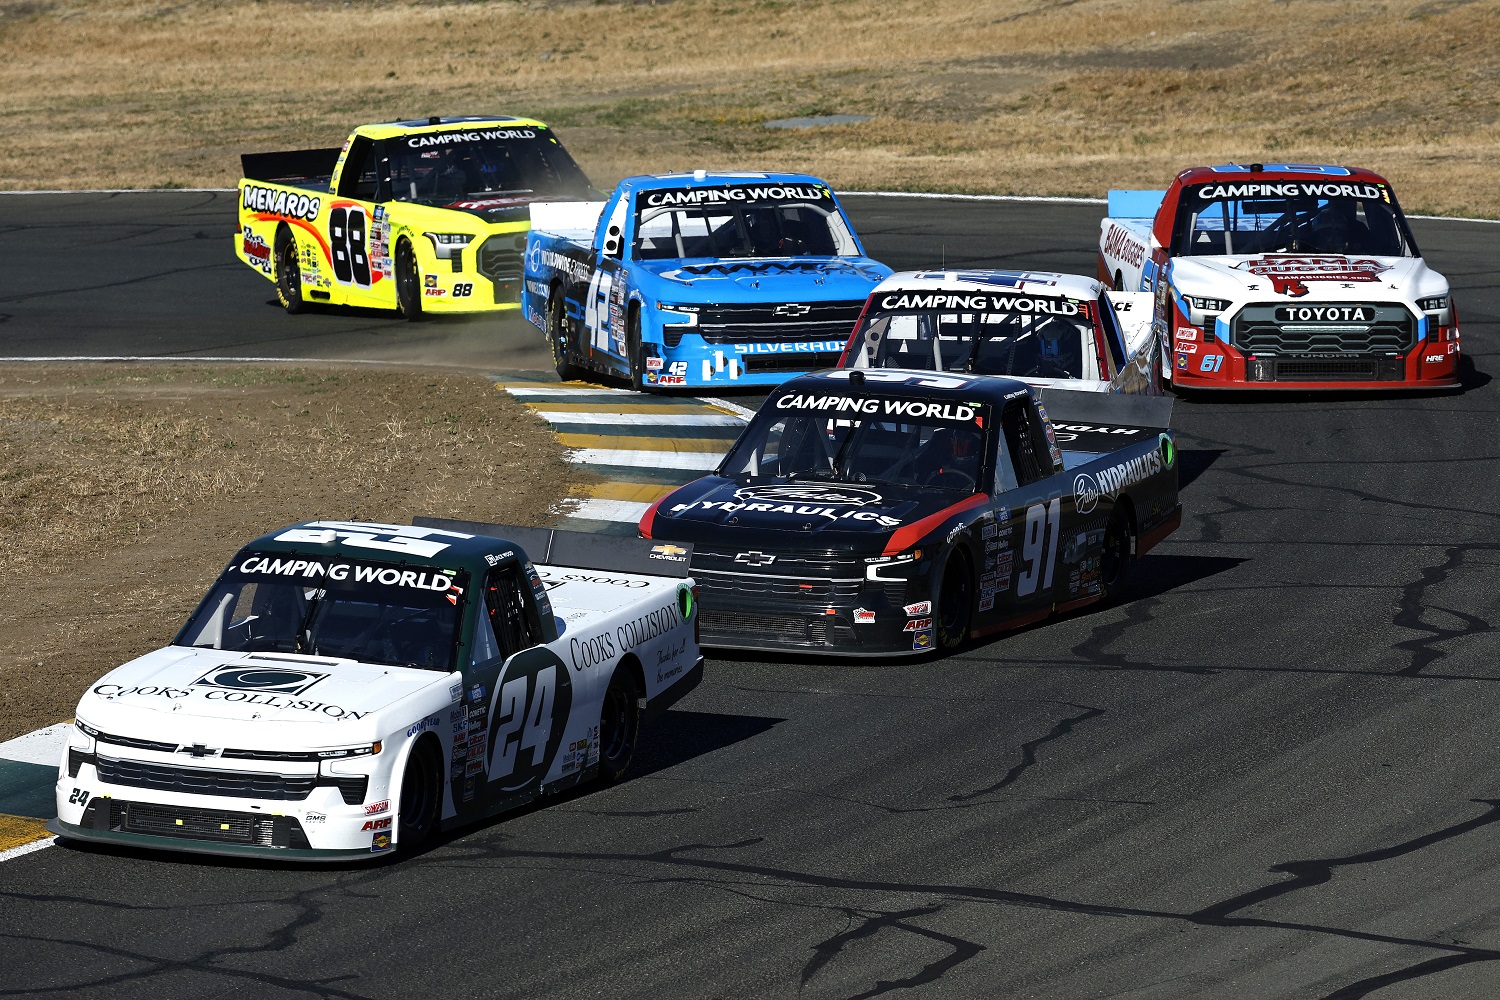 Jack Wood and Colby Howard lead the pack through a turn during the NASCAR Camping World Truck Series DoorDash 250 at Sonoma Raceway on June 11, 2022.